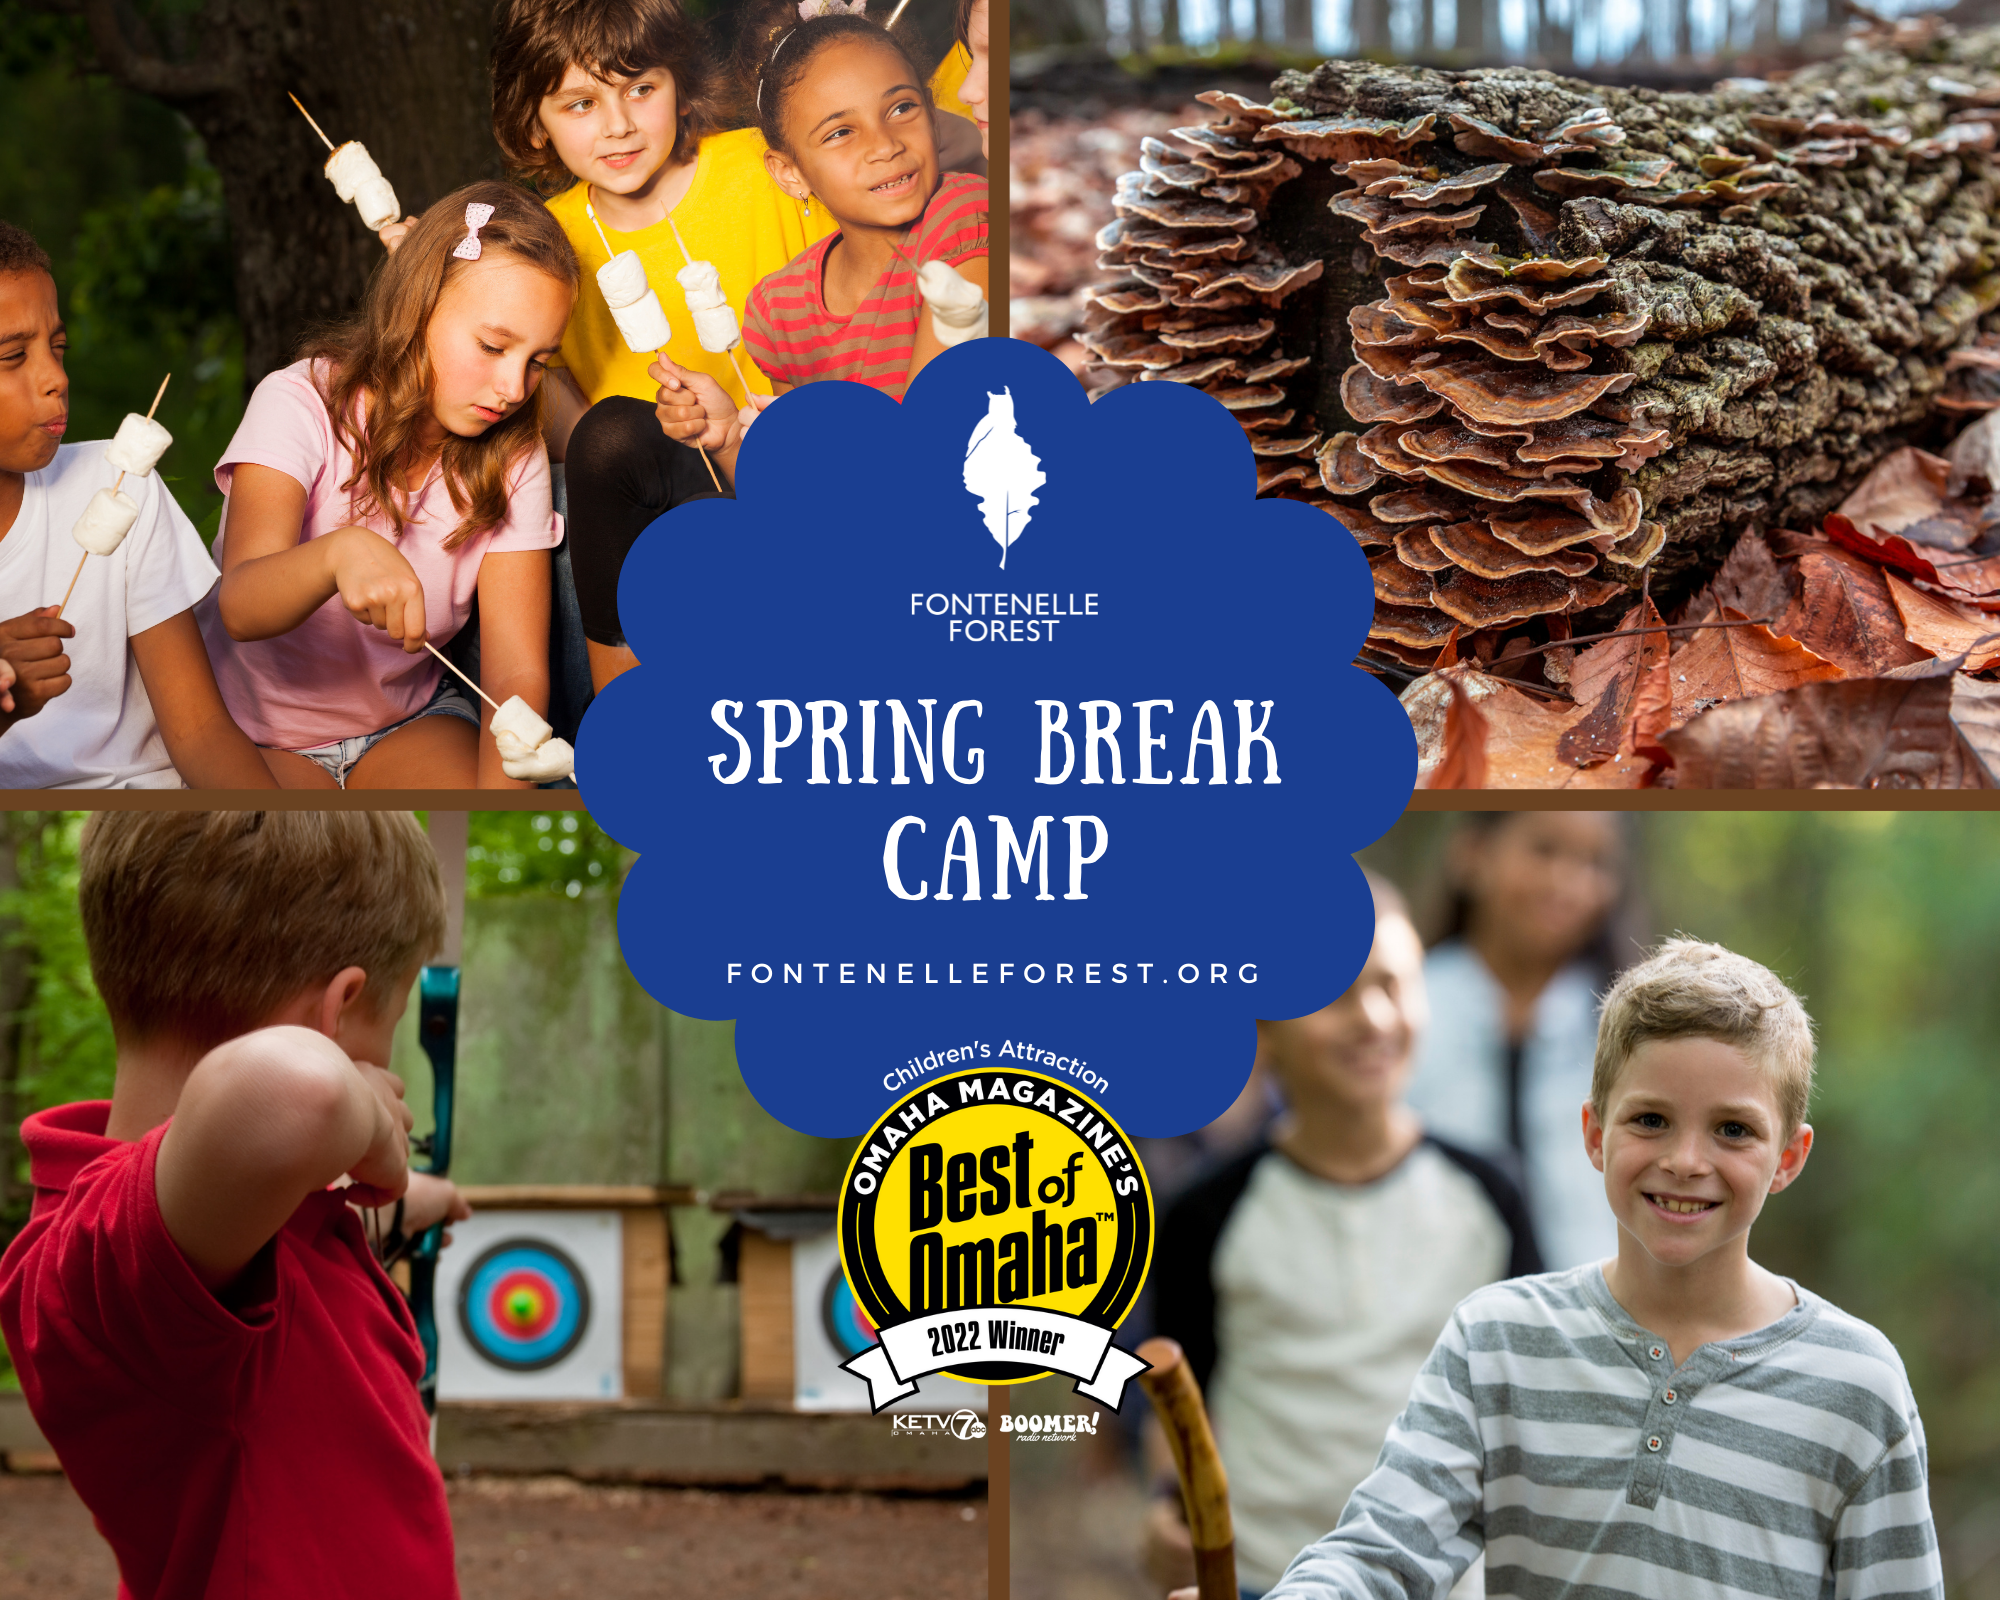 A graphic containing four images overlayed by the words "Spring Break Camp FontenelleForest.org" and the Best of Omaha emblem. The first image is of children roasting s'mores. The second image is of fungi growing on tree bark. The third image is of a child doing archery. The fourth image is of a boy smiling while on a hike.